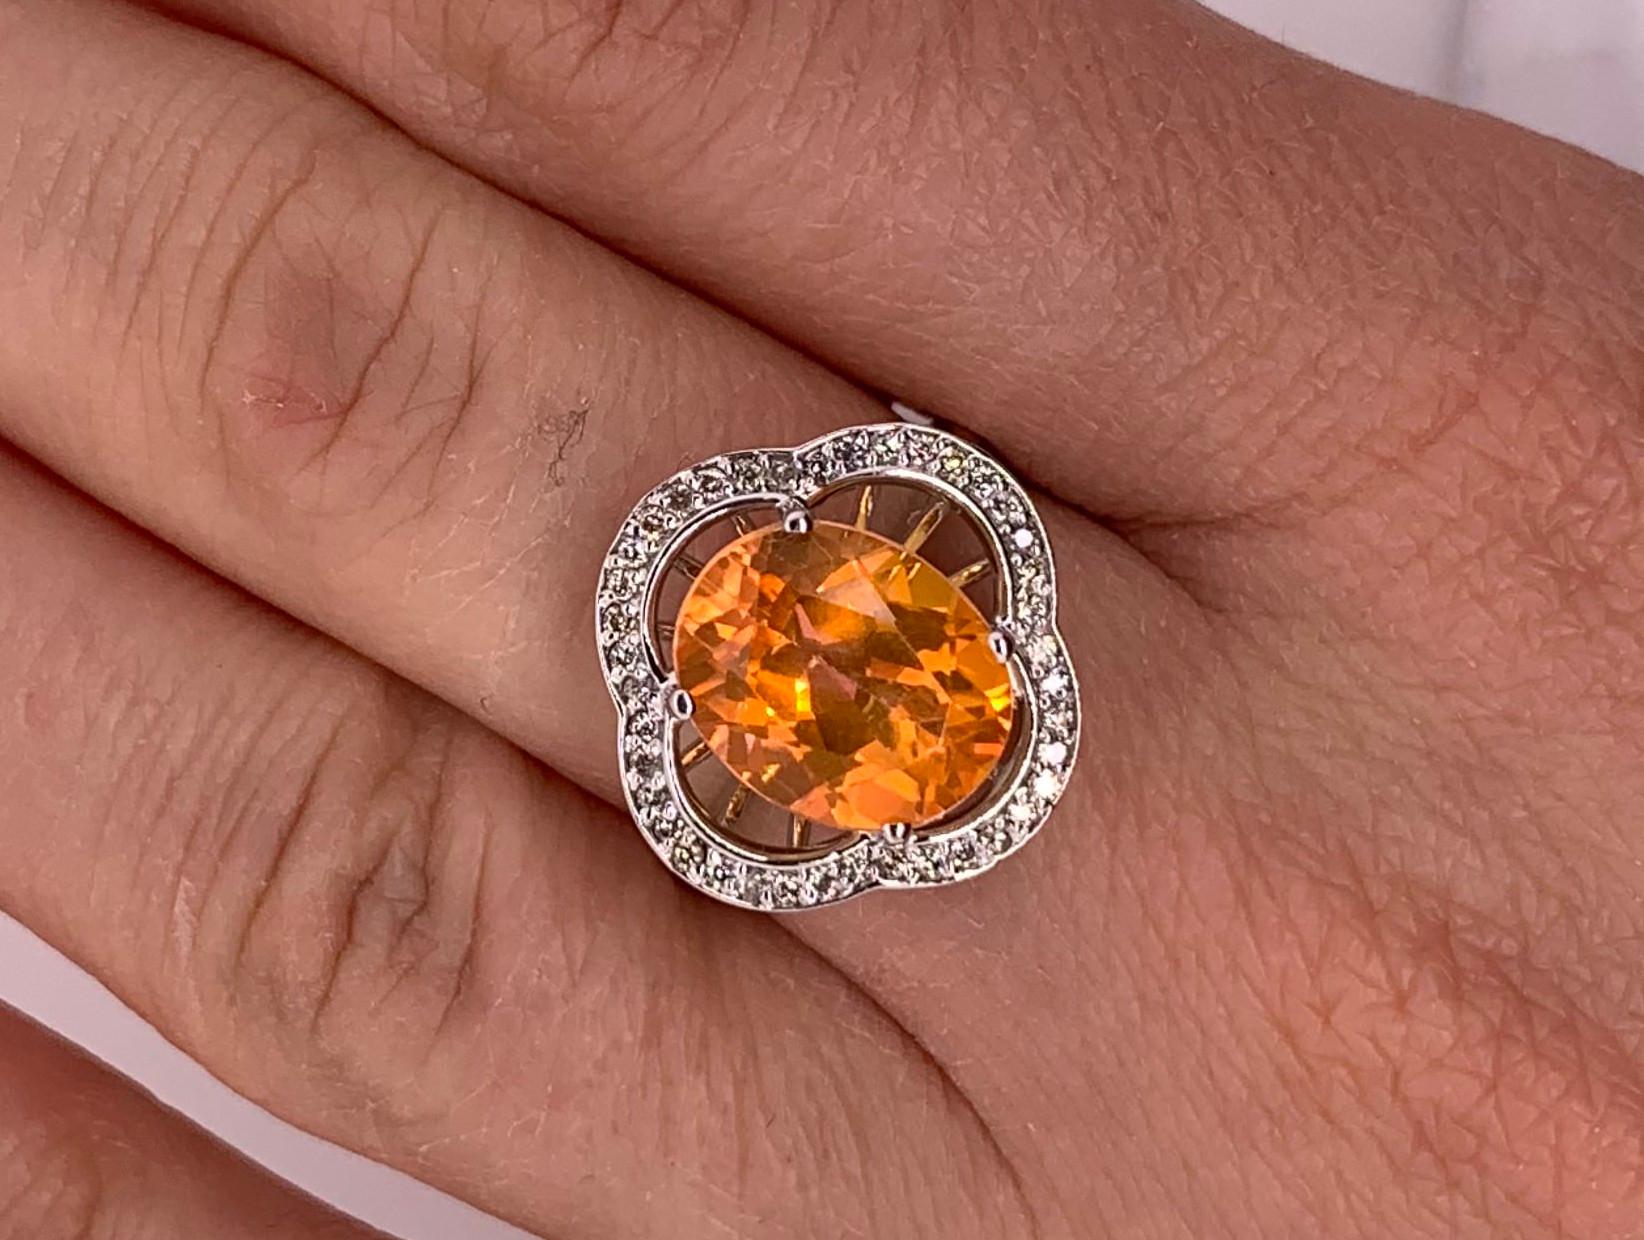 Material: 14k White Gold 
Stone Details: 1 Oval Shaped Sunset Topaz at 4.9 Carats - Measuring 9 x 11 mm
Diamond Details: 40 Brilliant Round White Diamonds at 0.20 Carats. SI Clarity / H-I Color. 
Ring Size: 5.5. Alberto offers complimentary sizing